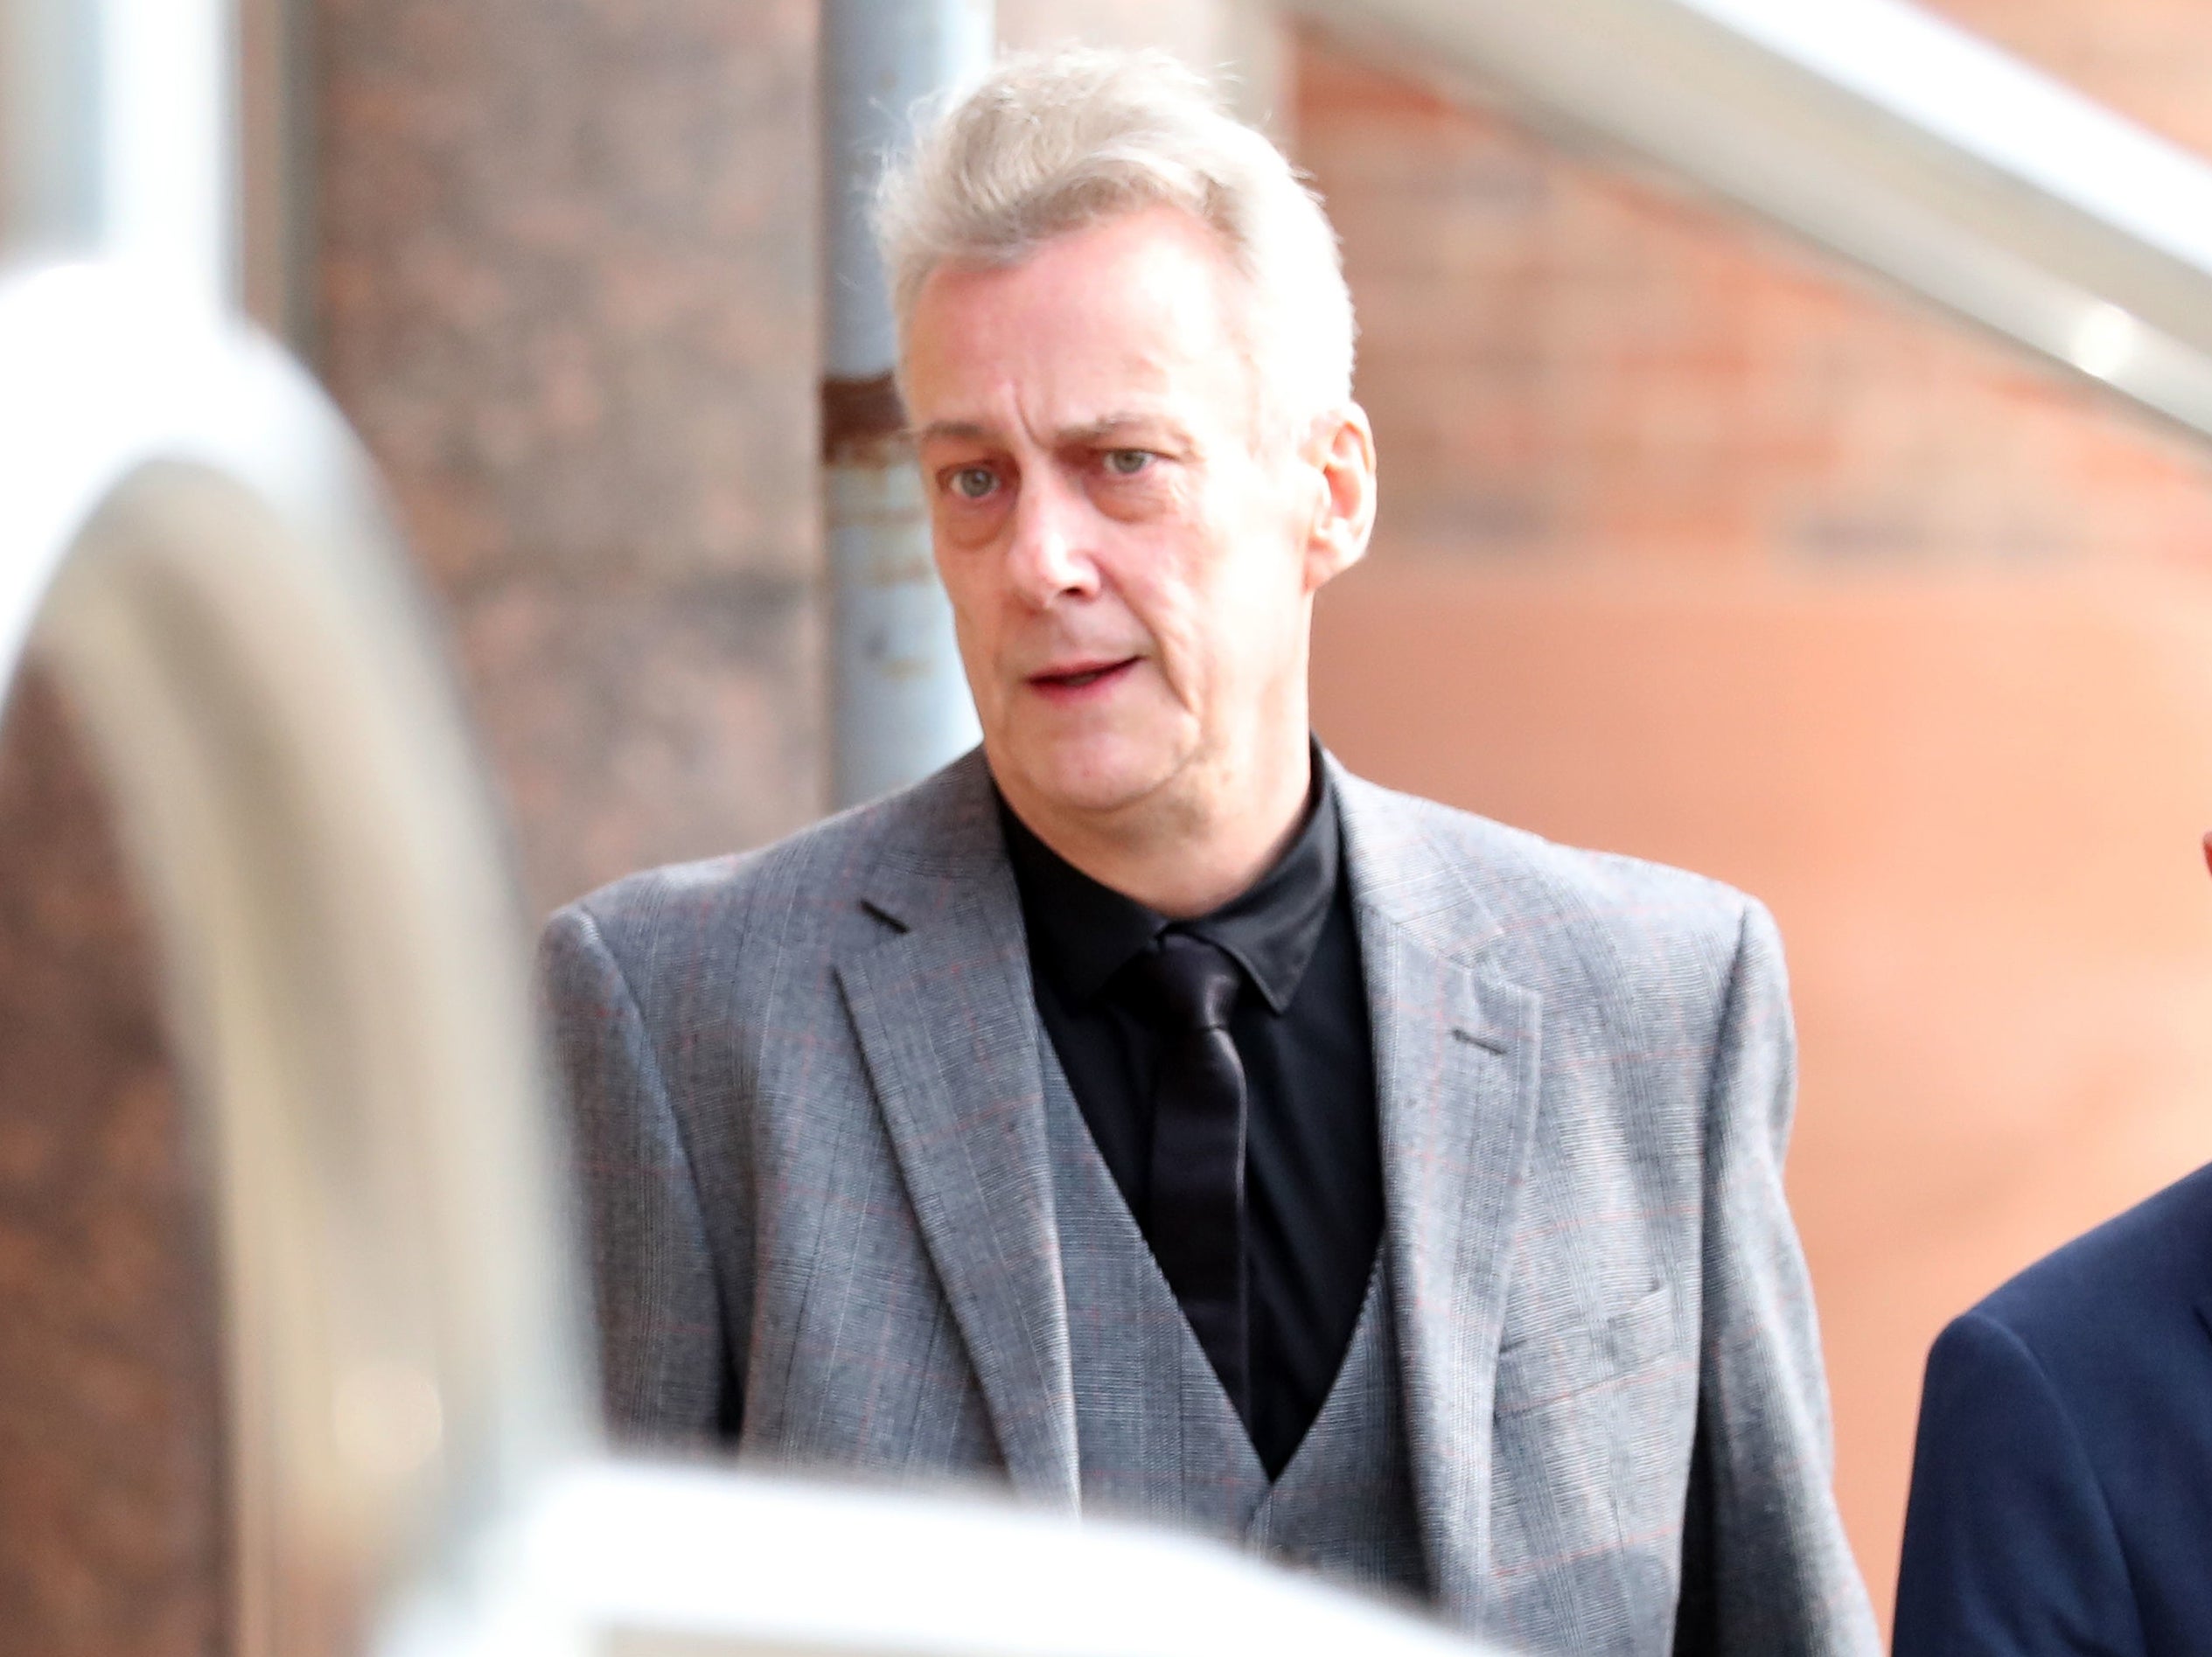 Stephen Tomkinson is accused of causing grievous bodily harm